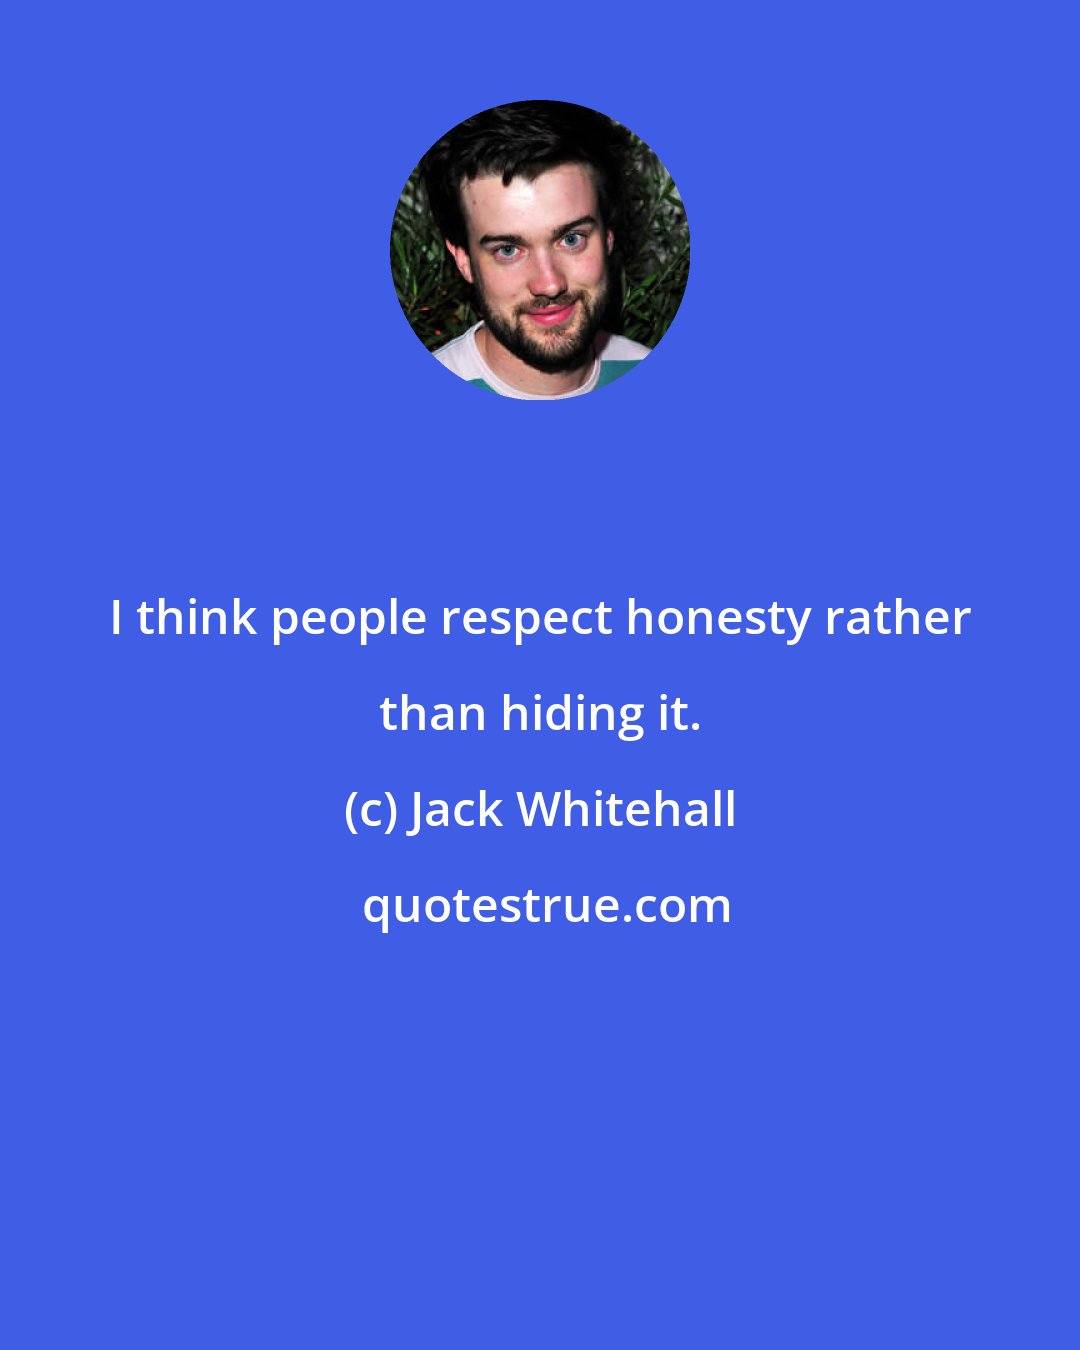 Jack Whitehall: I think people respect honesty rather than hiding it.